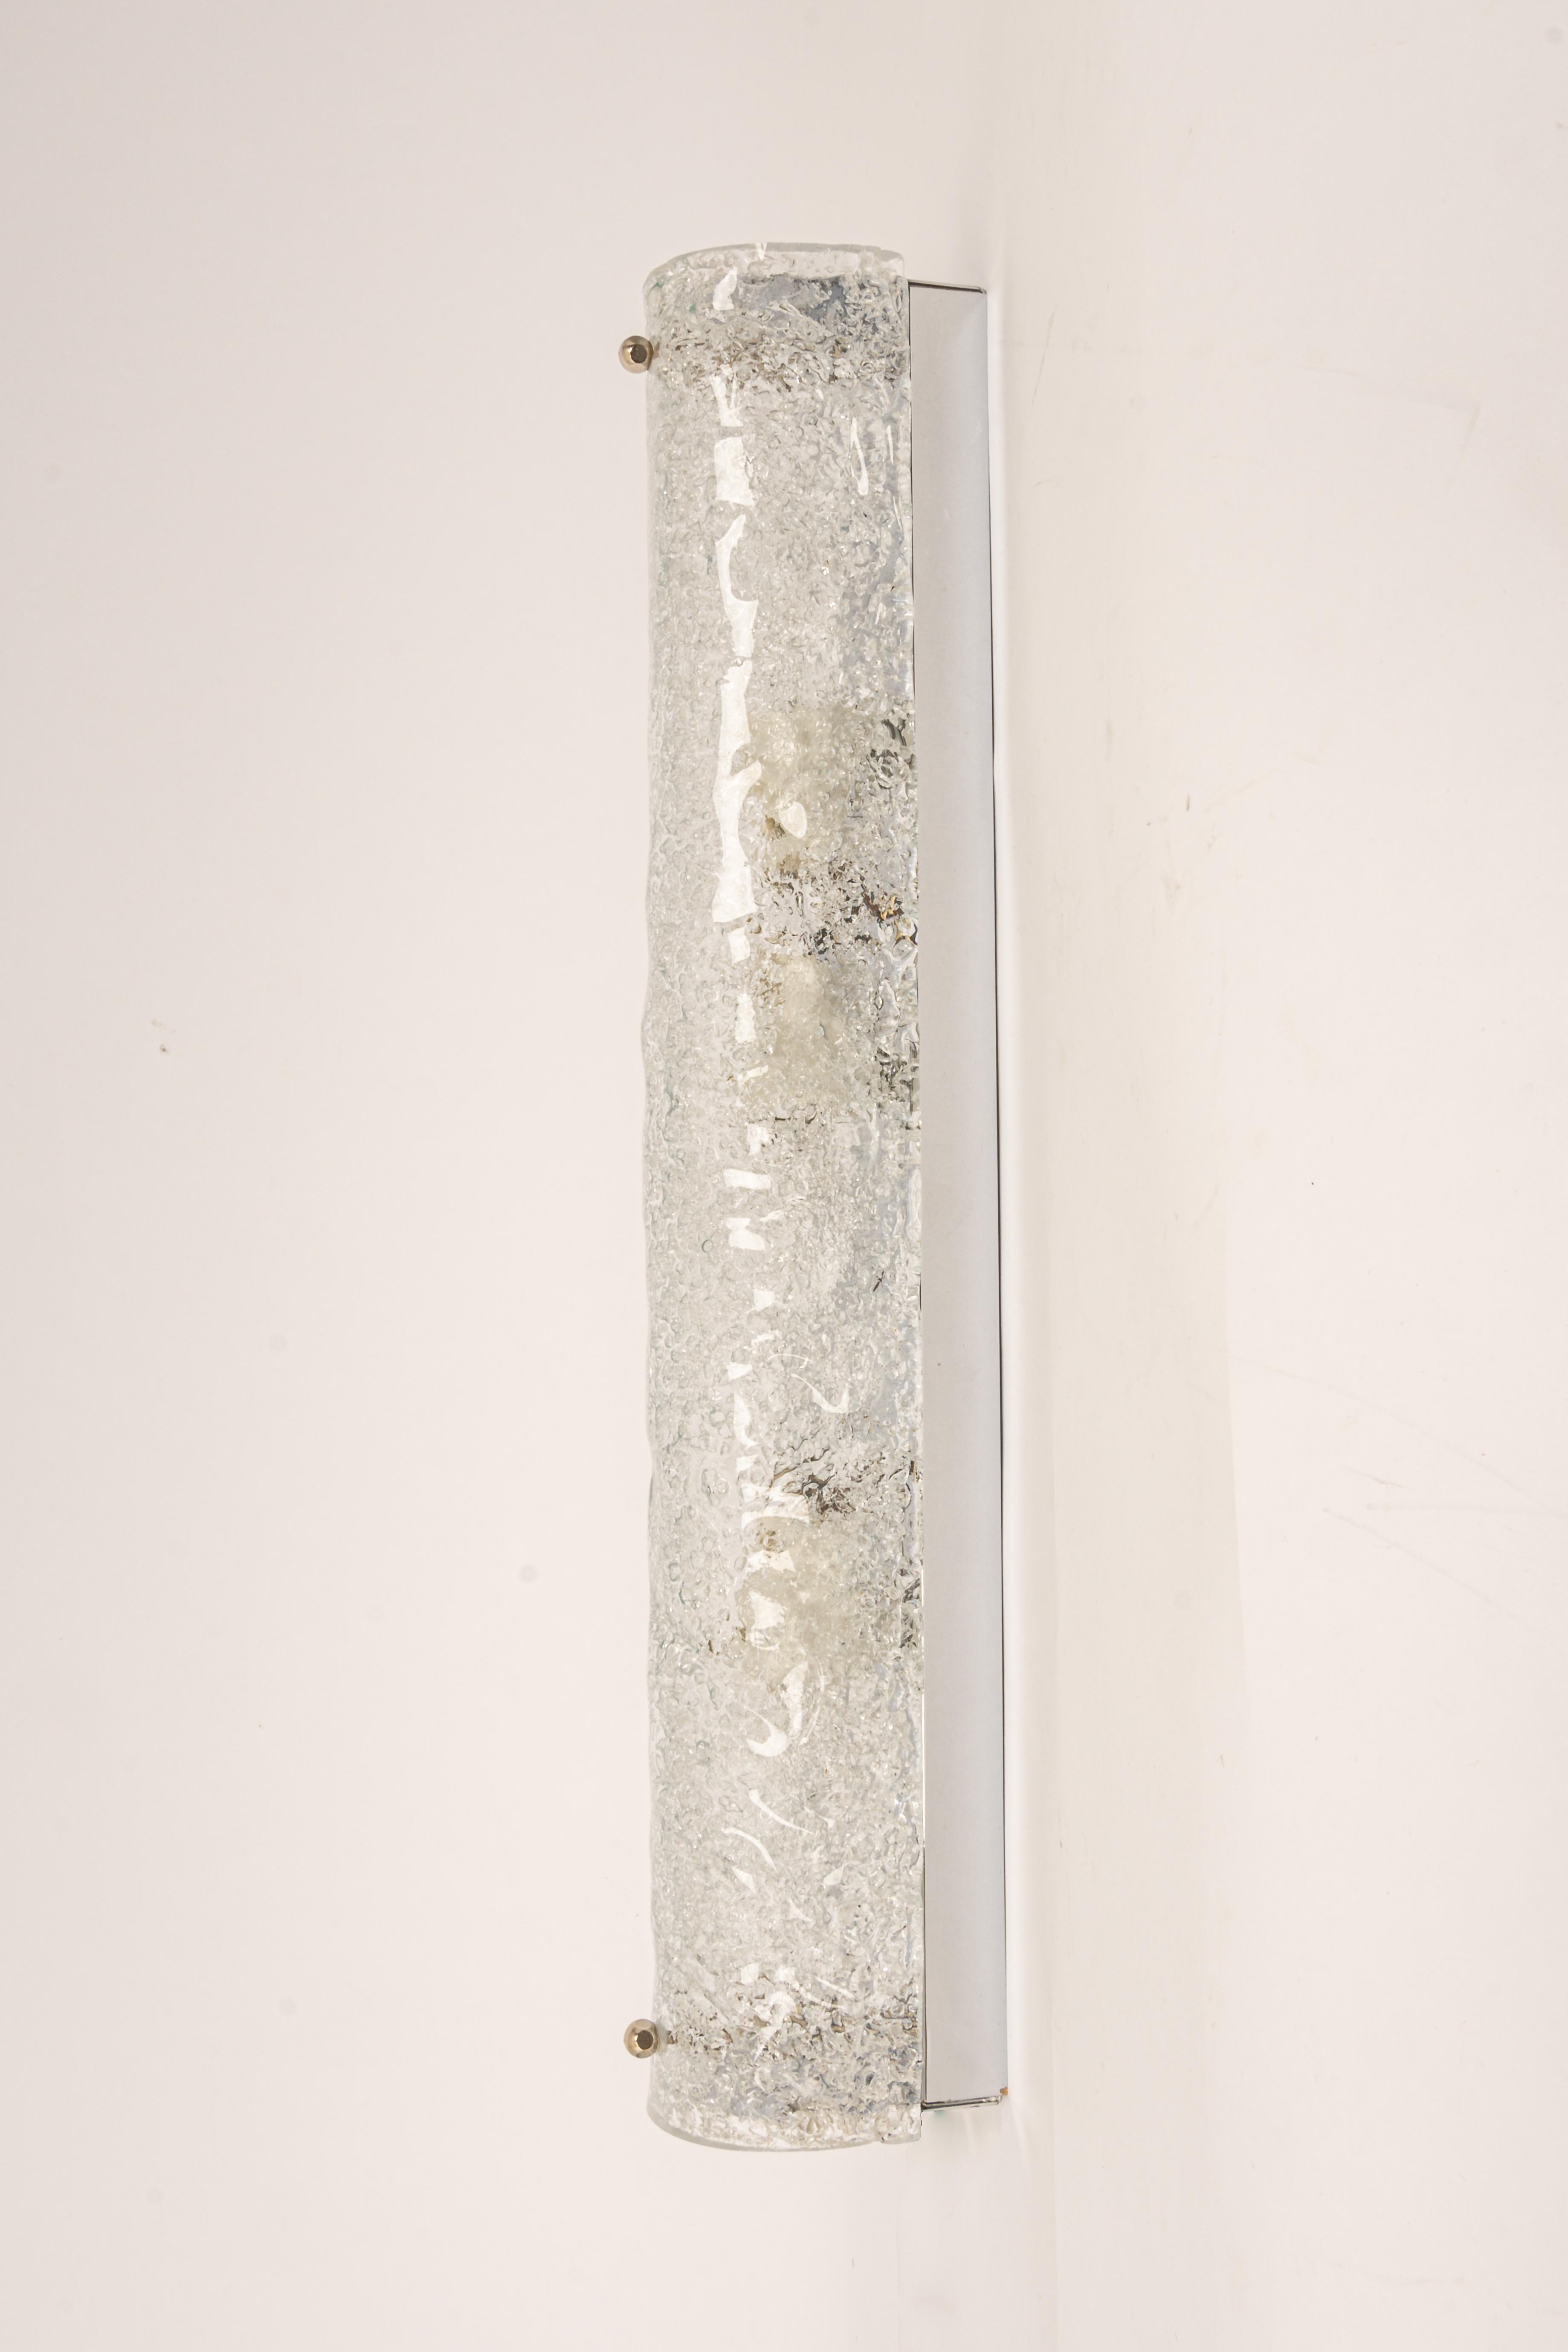 Pair of large handcrafted Murano glass on a chromed base sconces by Hillebrand, Germany, circa 1960s.

It consists of a textured quality clear crystal tubular shade simulating ice on a chrome frame.
The design allows this light to be placed either